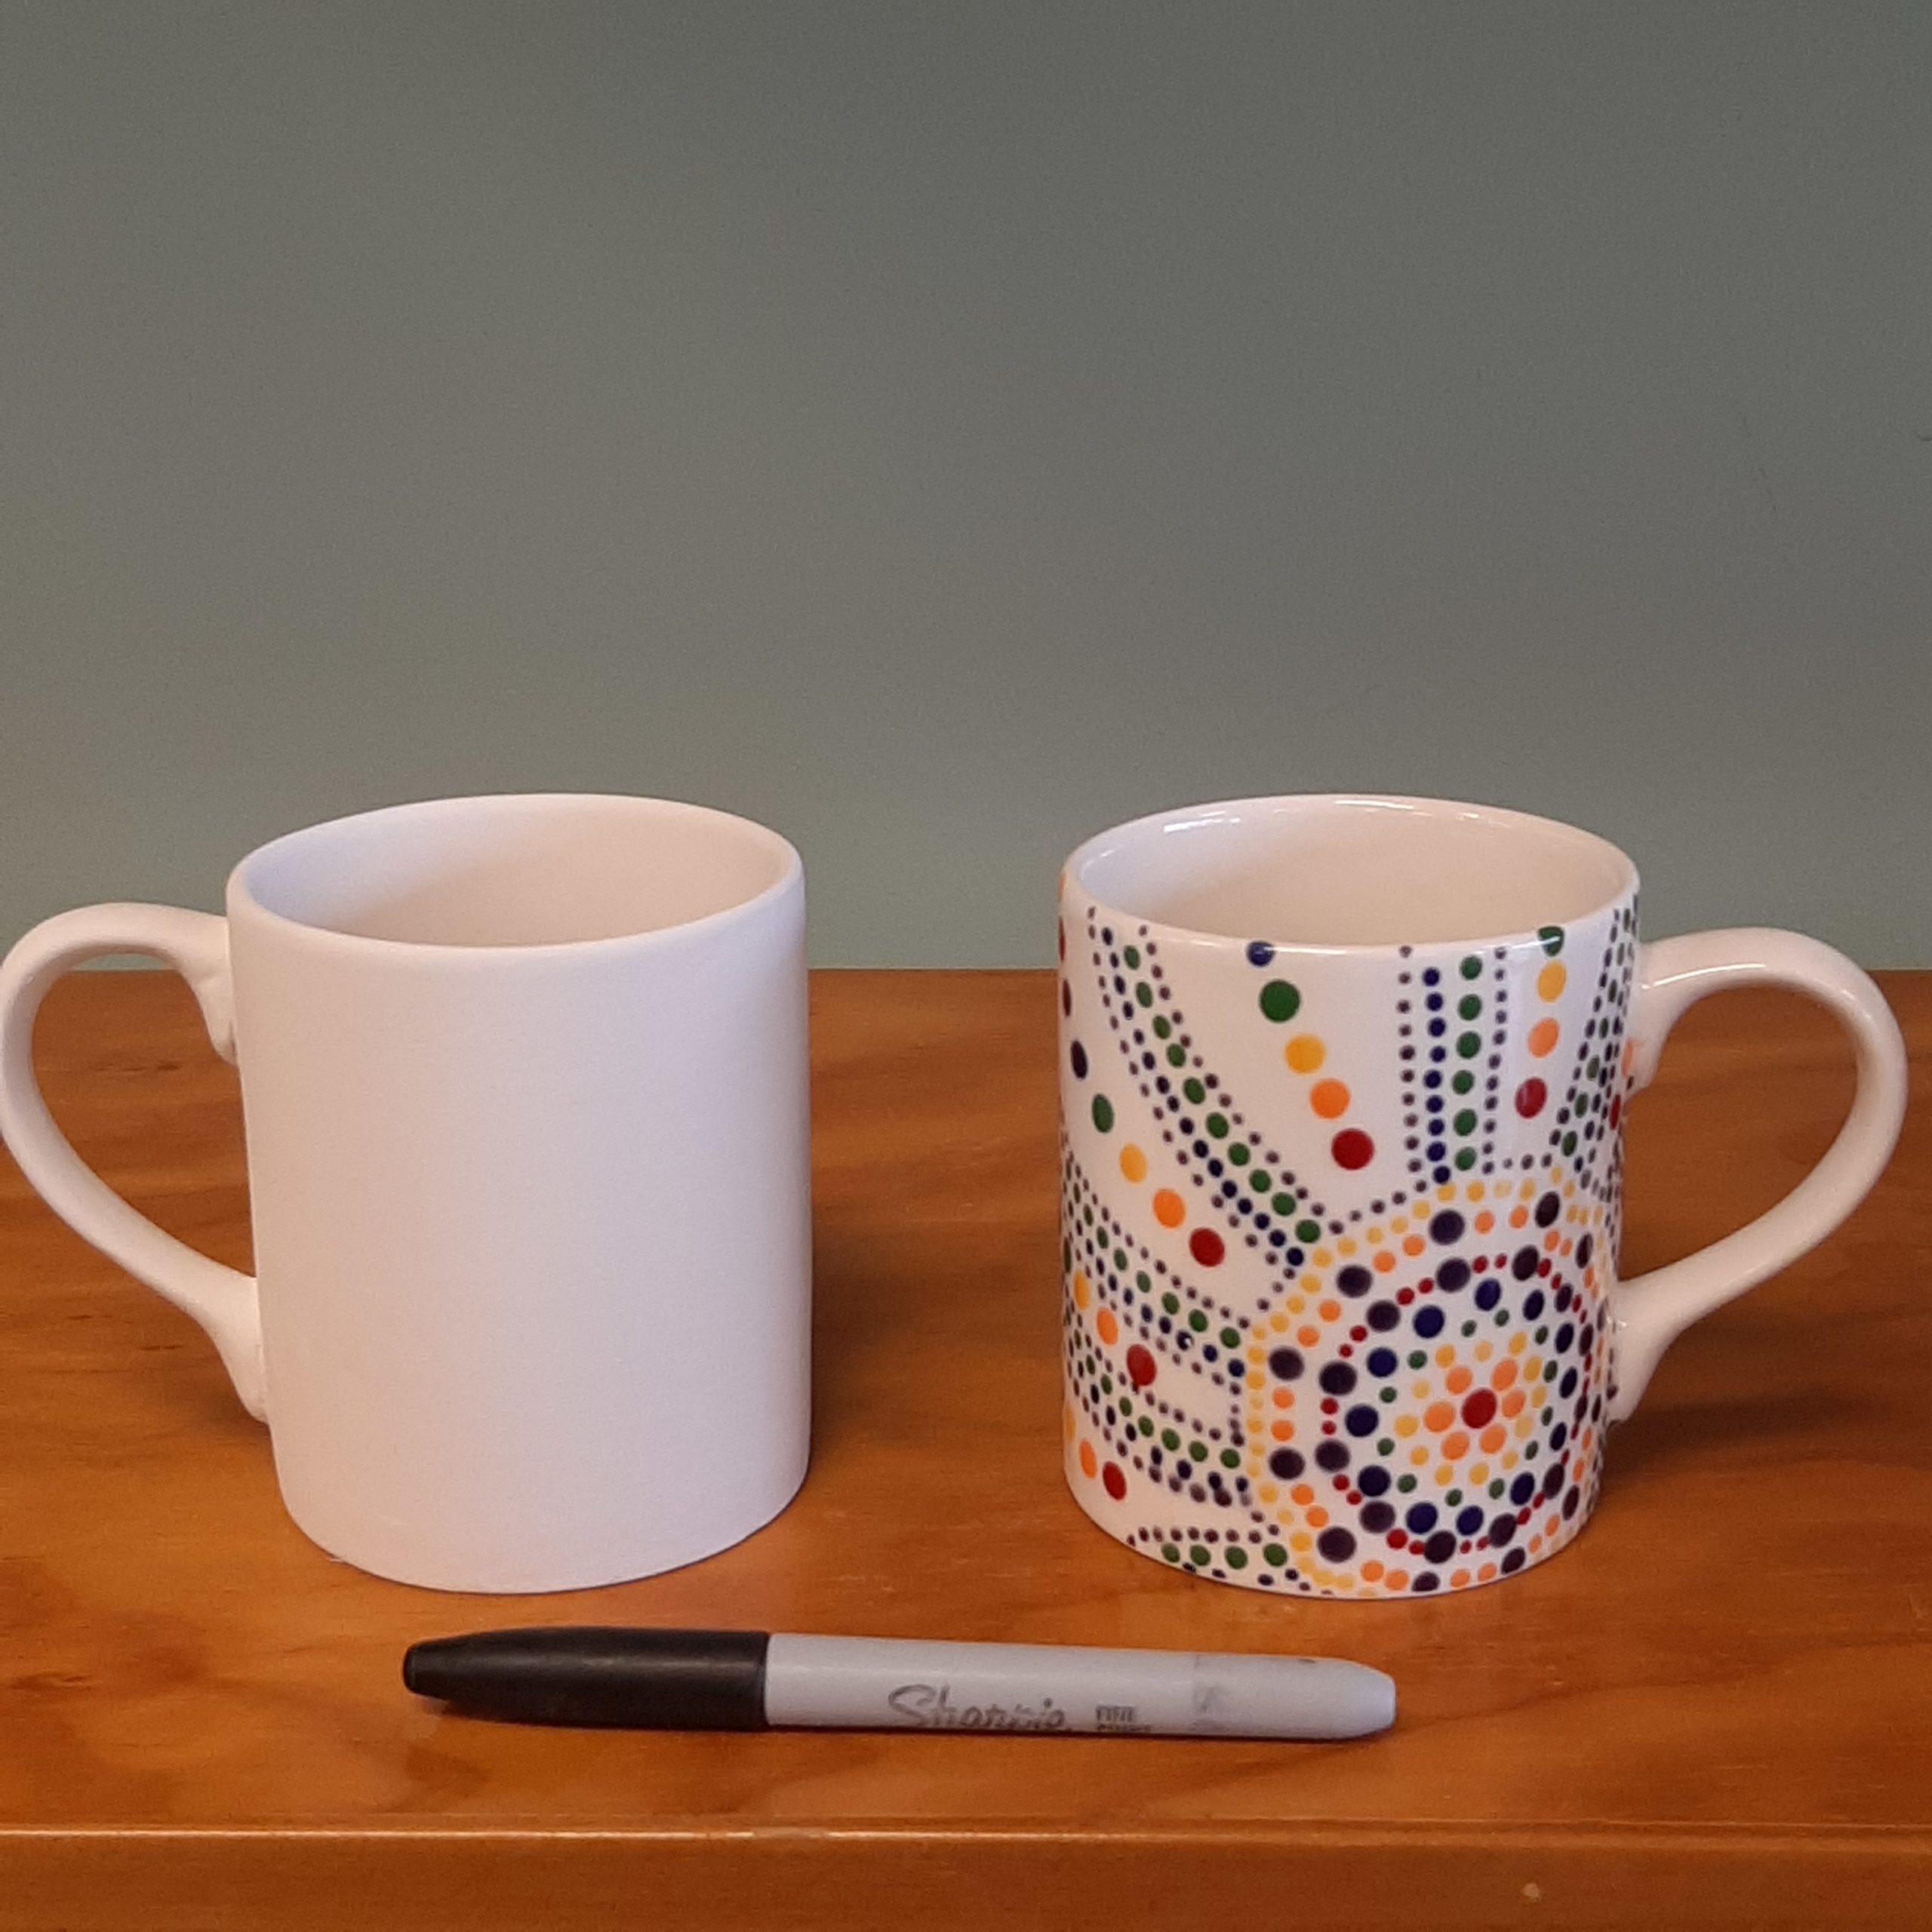 Colorations® Decorate Your Own Ceramic Mugs - Set of 12